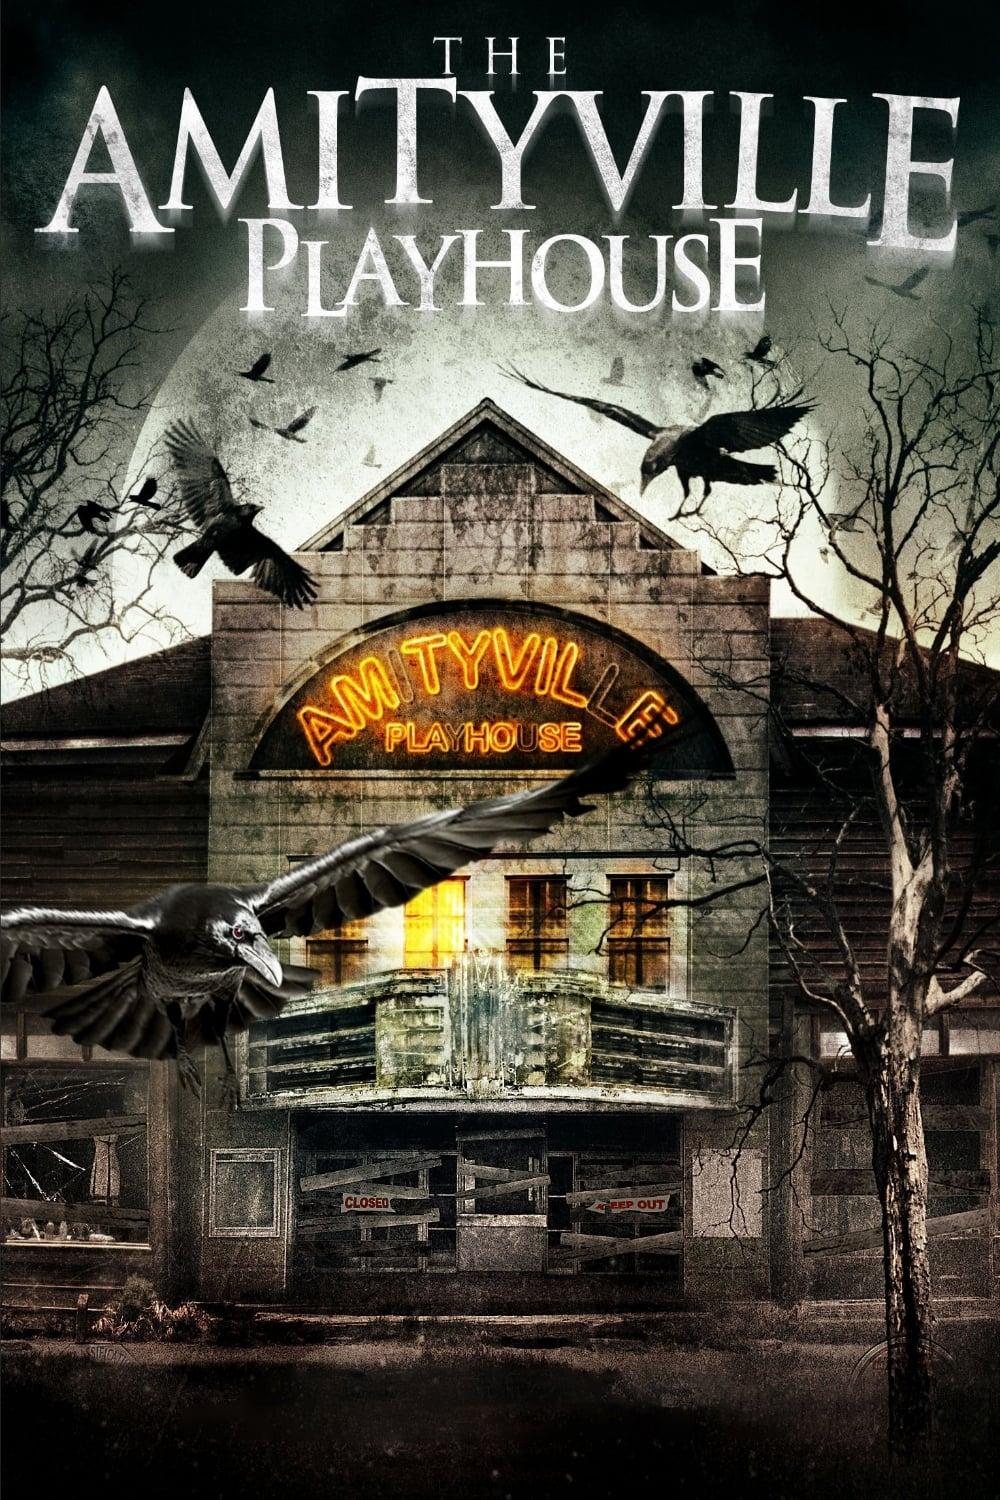 The Amityville Playhouse poster